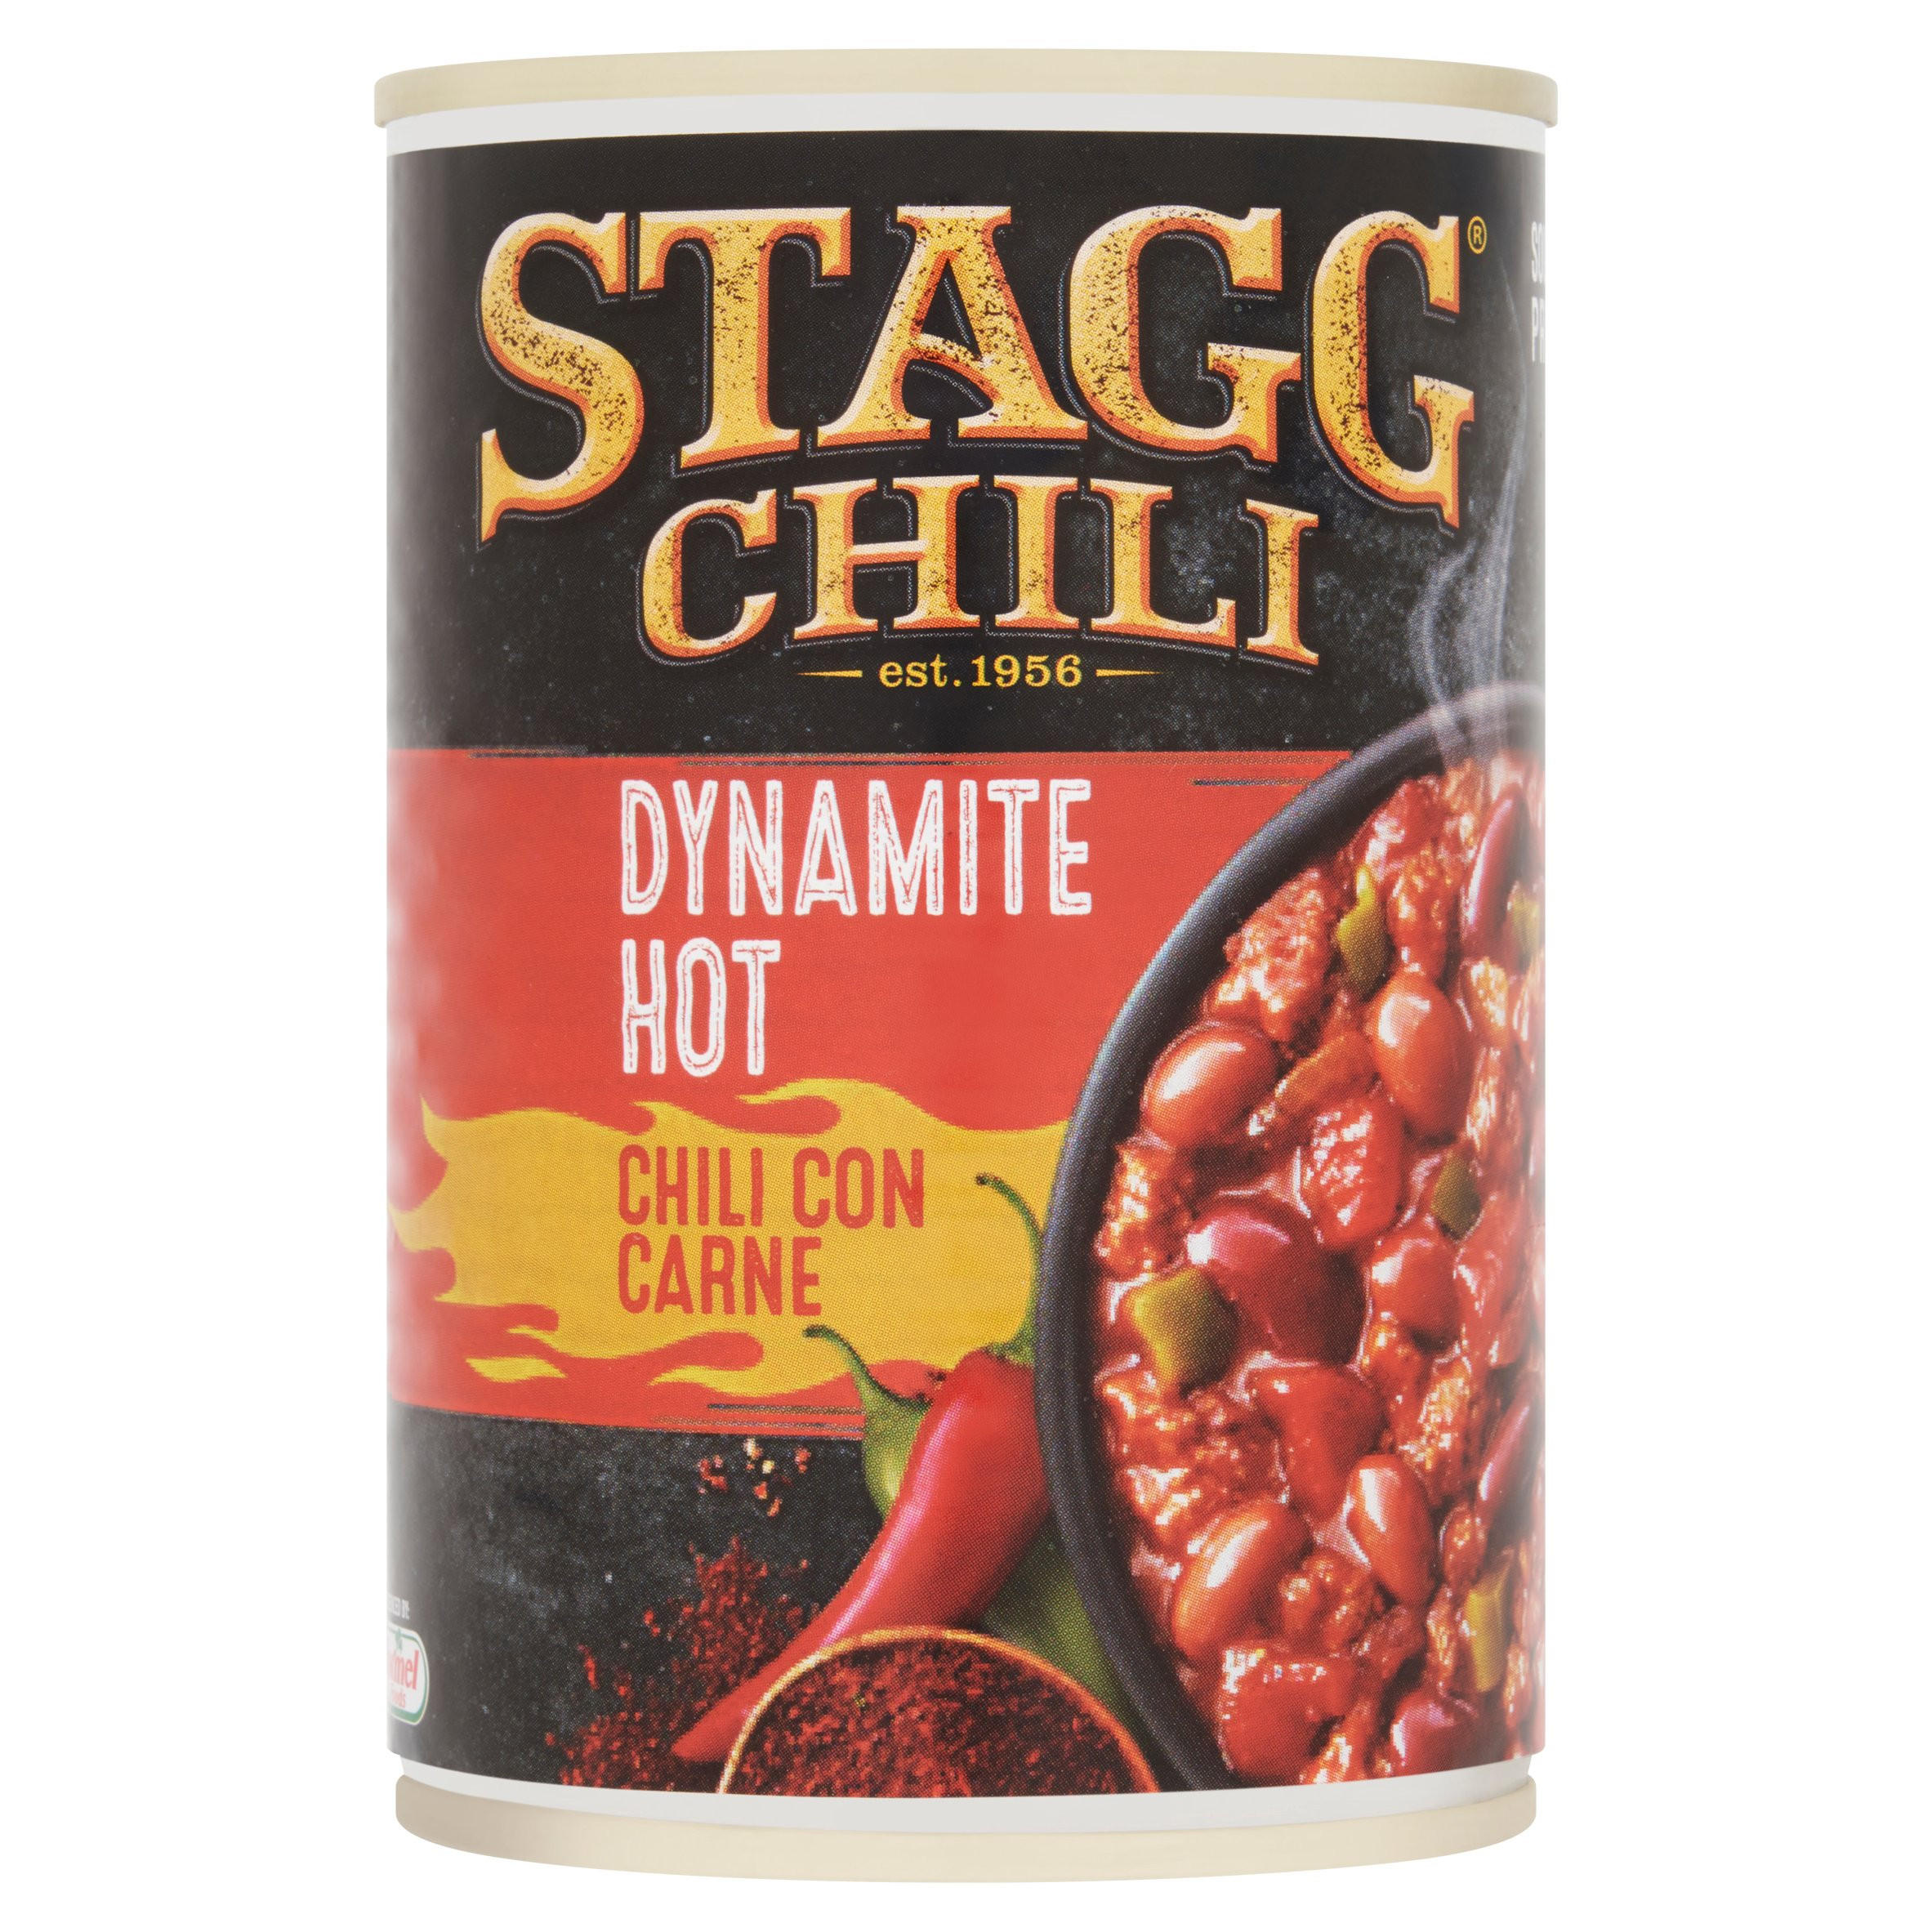 Stagg Chili Dynamite Hot Chili Con Carne G Tinned Meat Pies